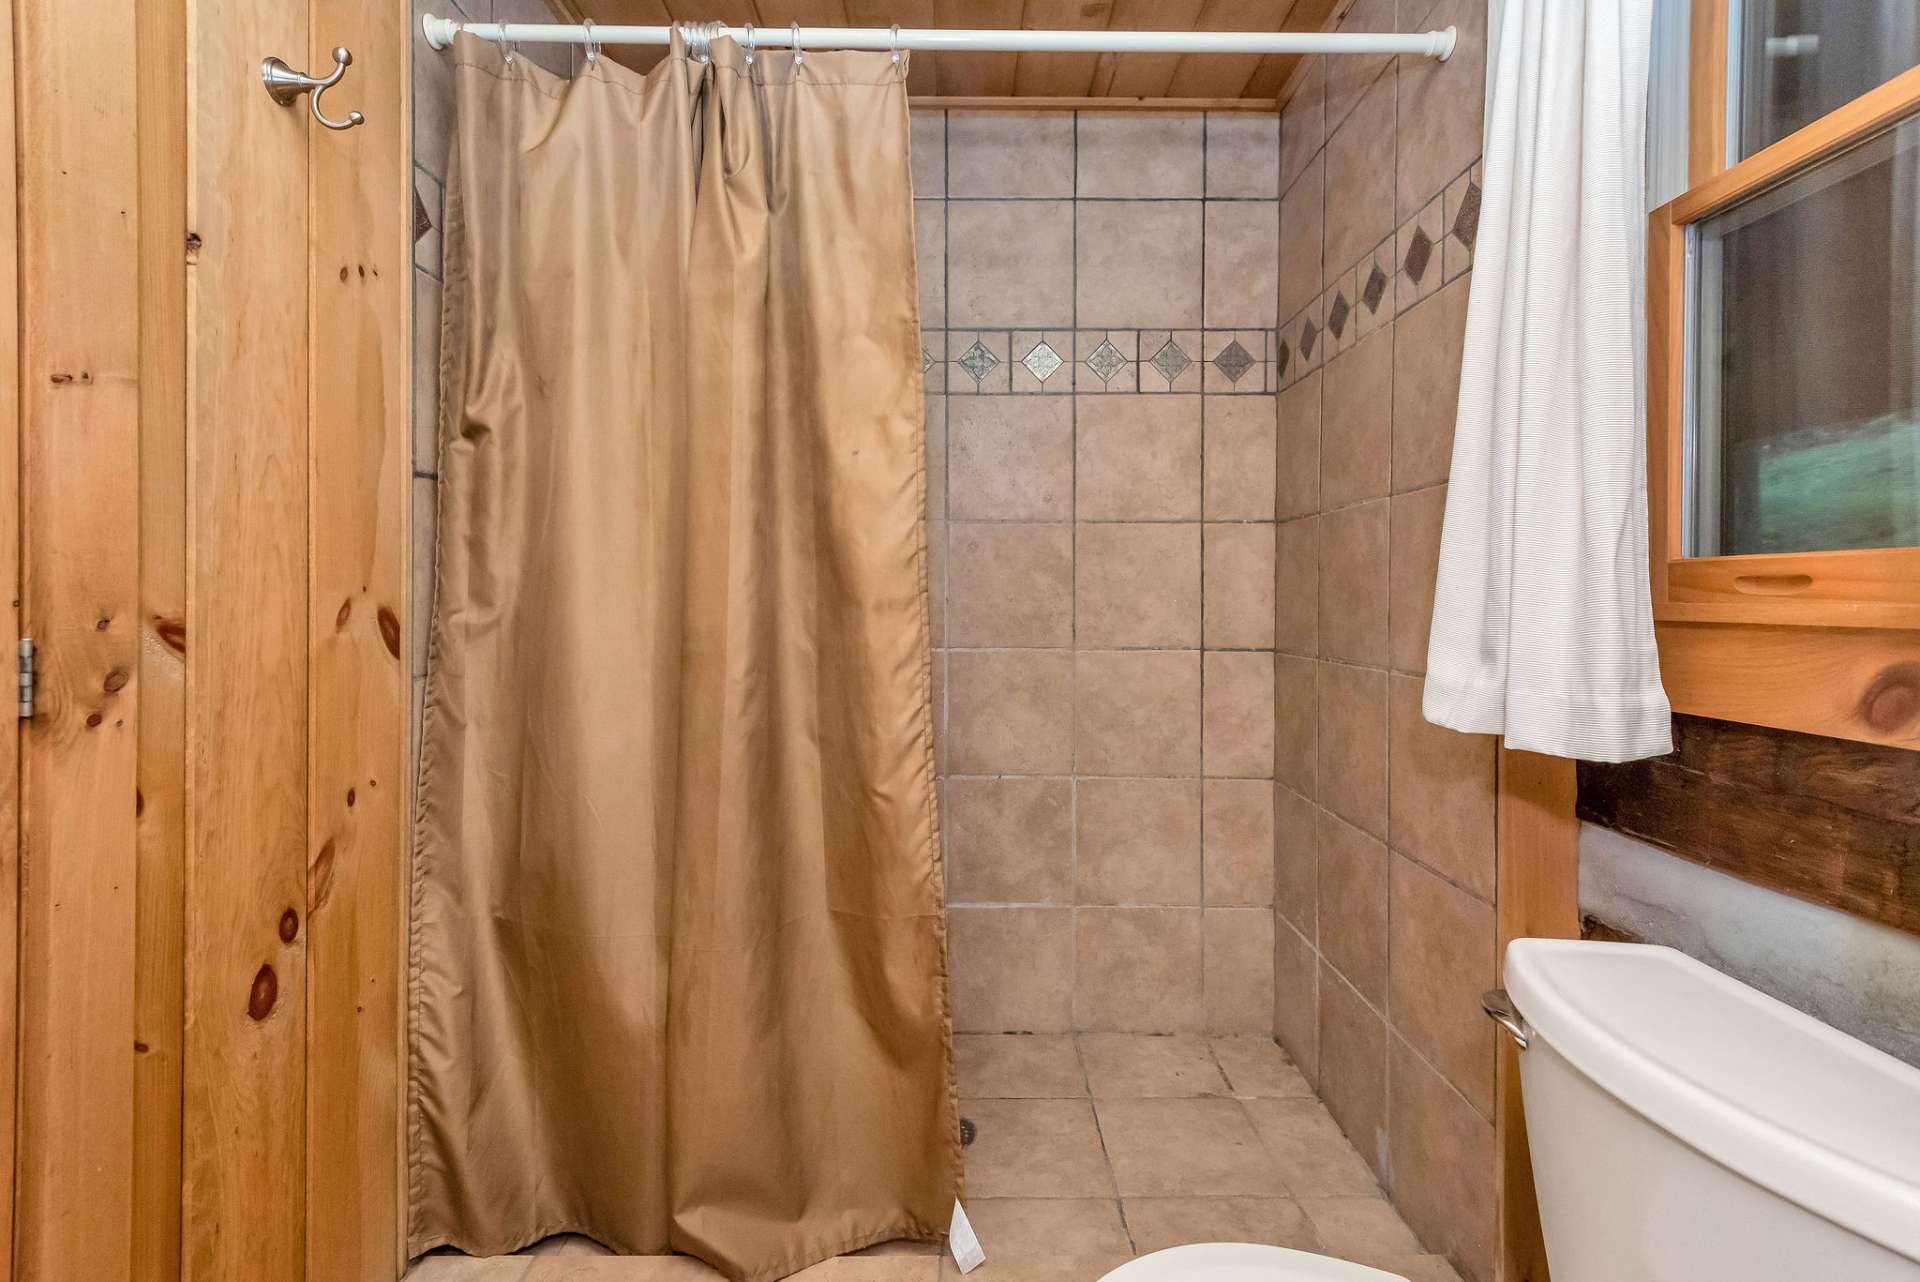 Enjoy an easy step-in tiled shower in your master bath.